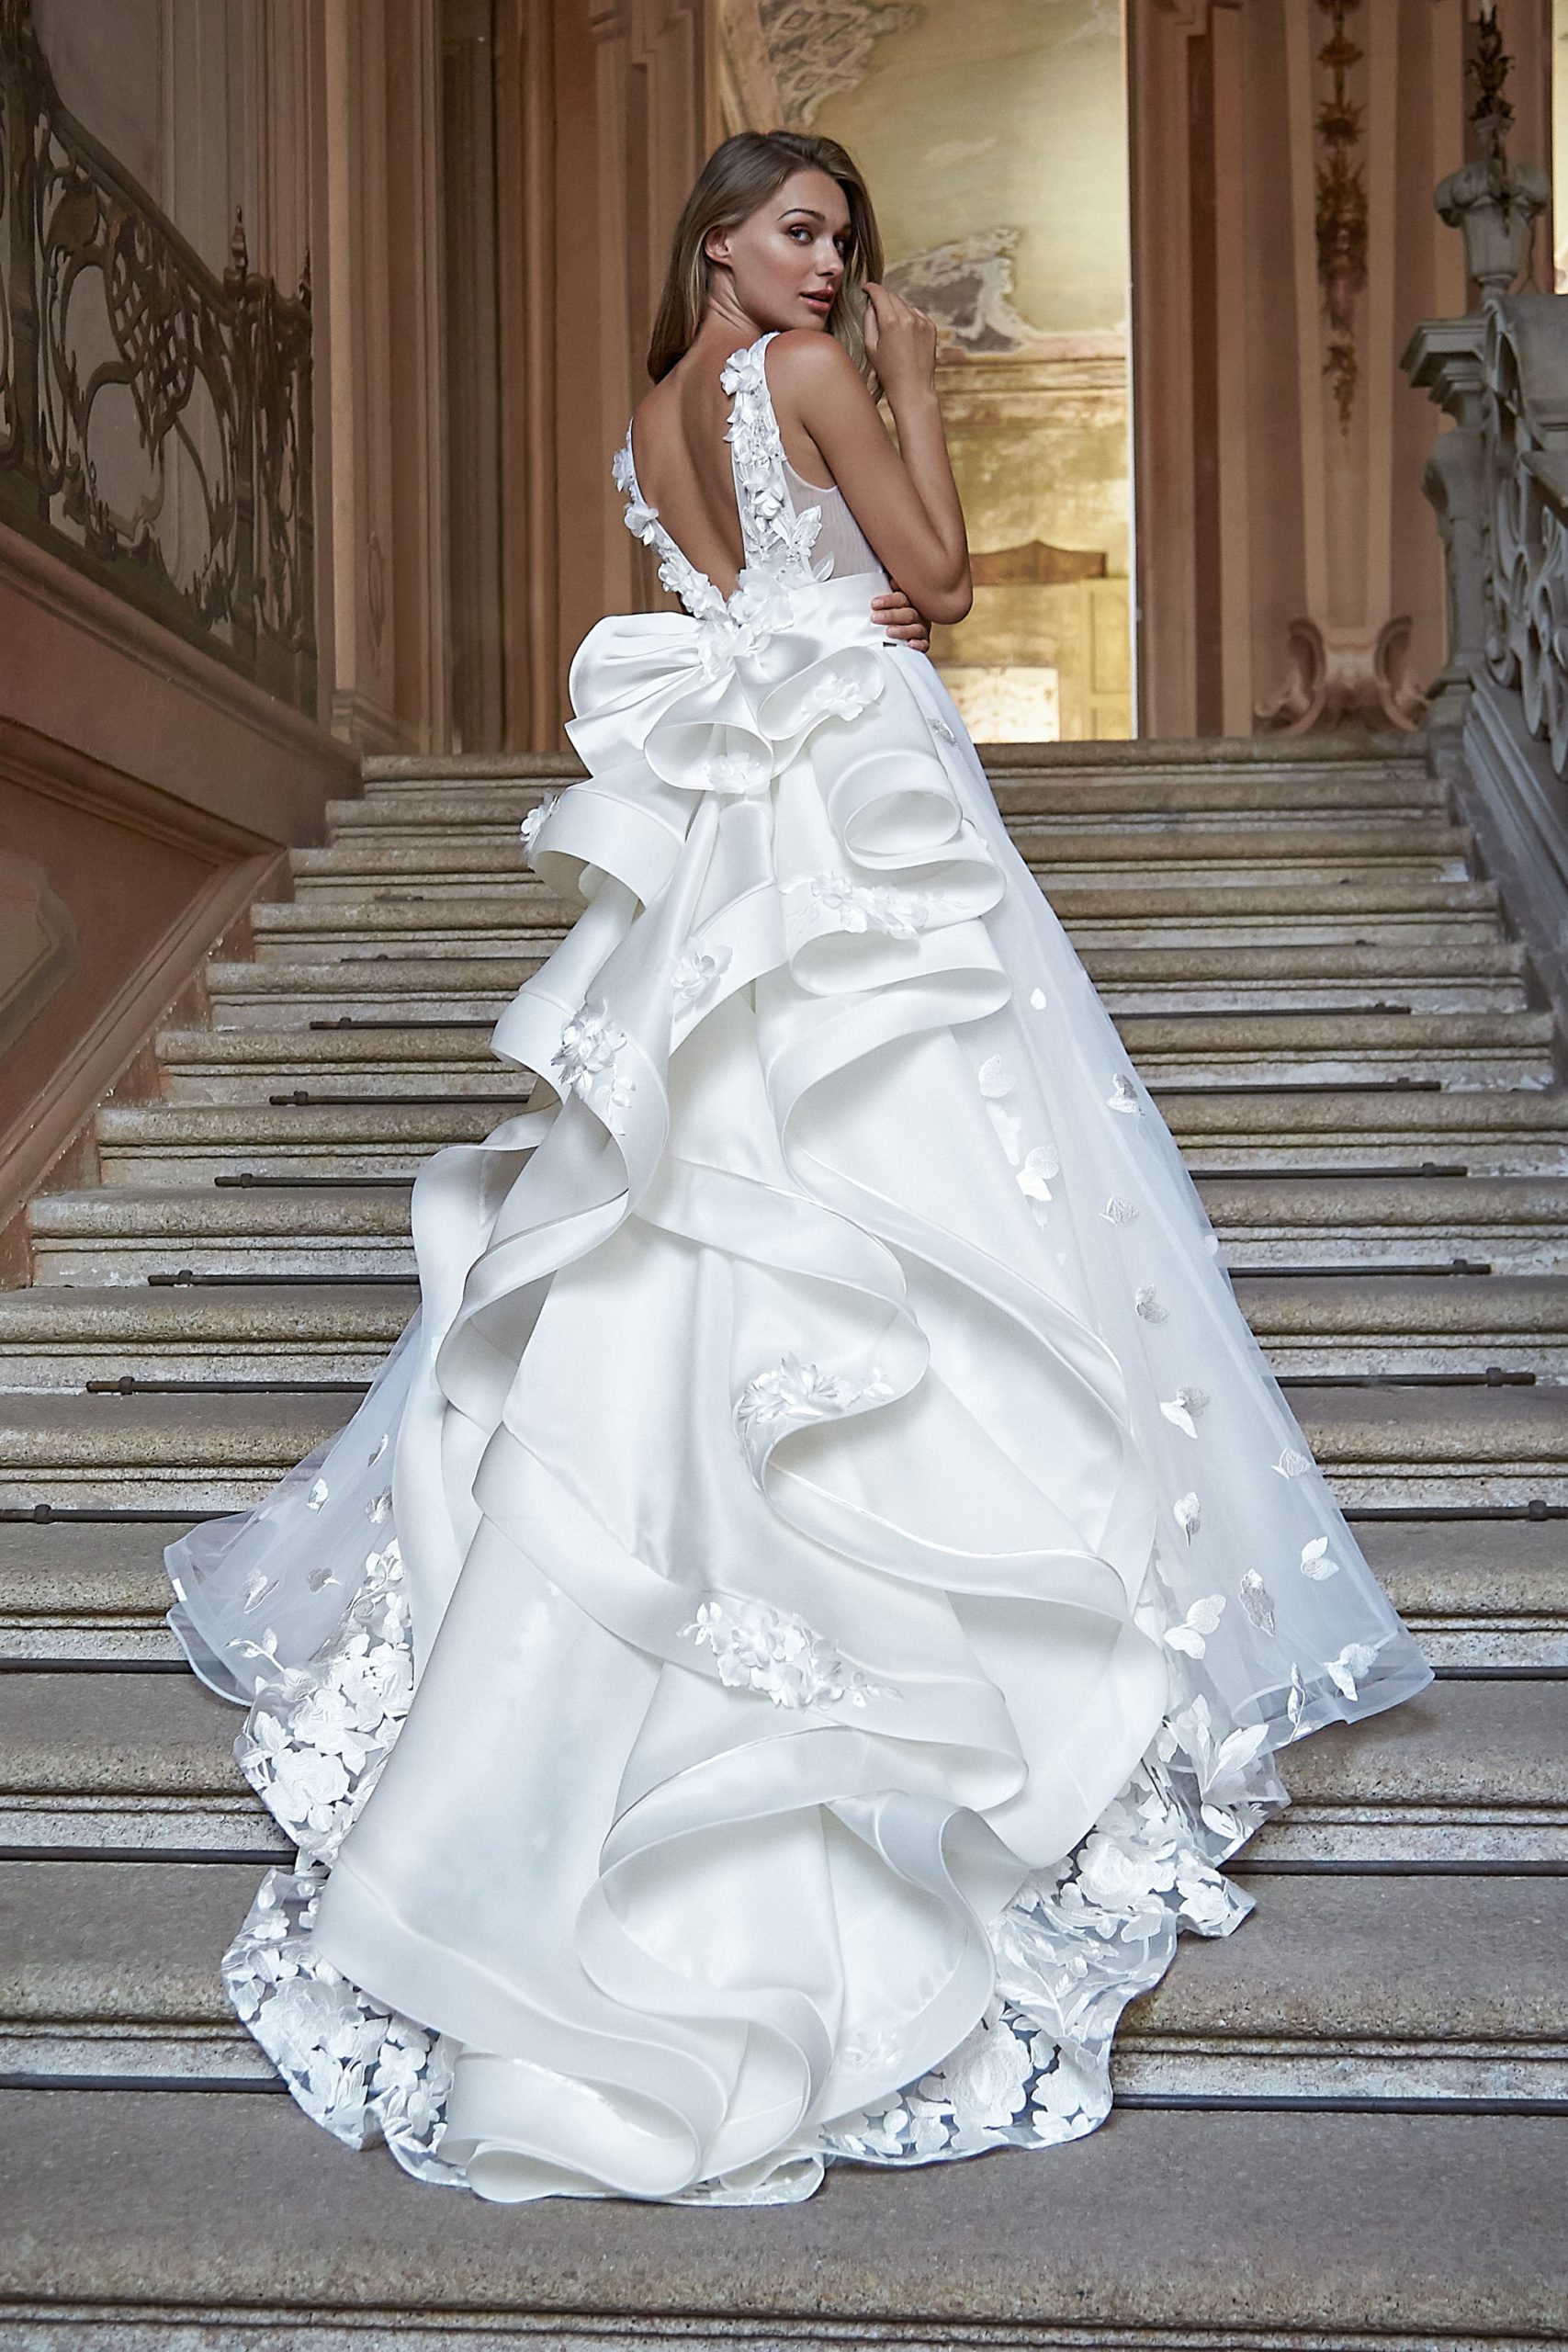 Ruffle Wedding Dresses: Volume and Movement for a Unique and Special Look